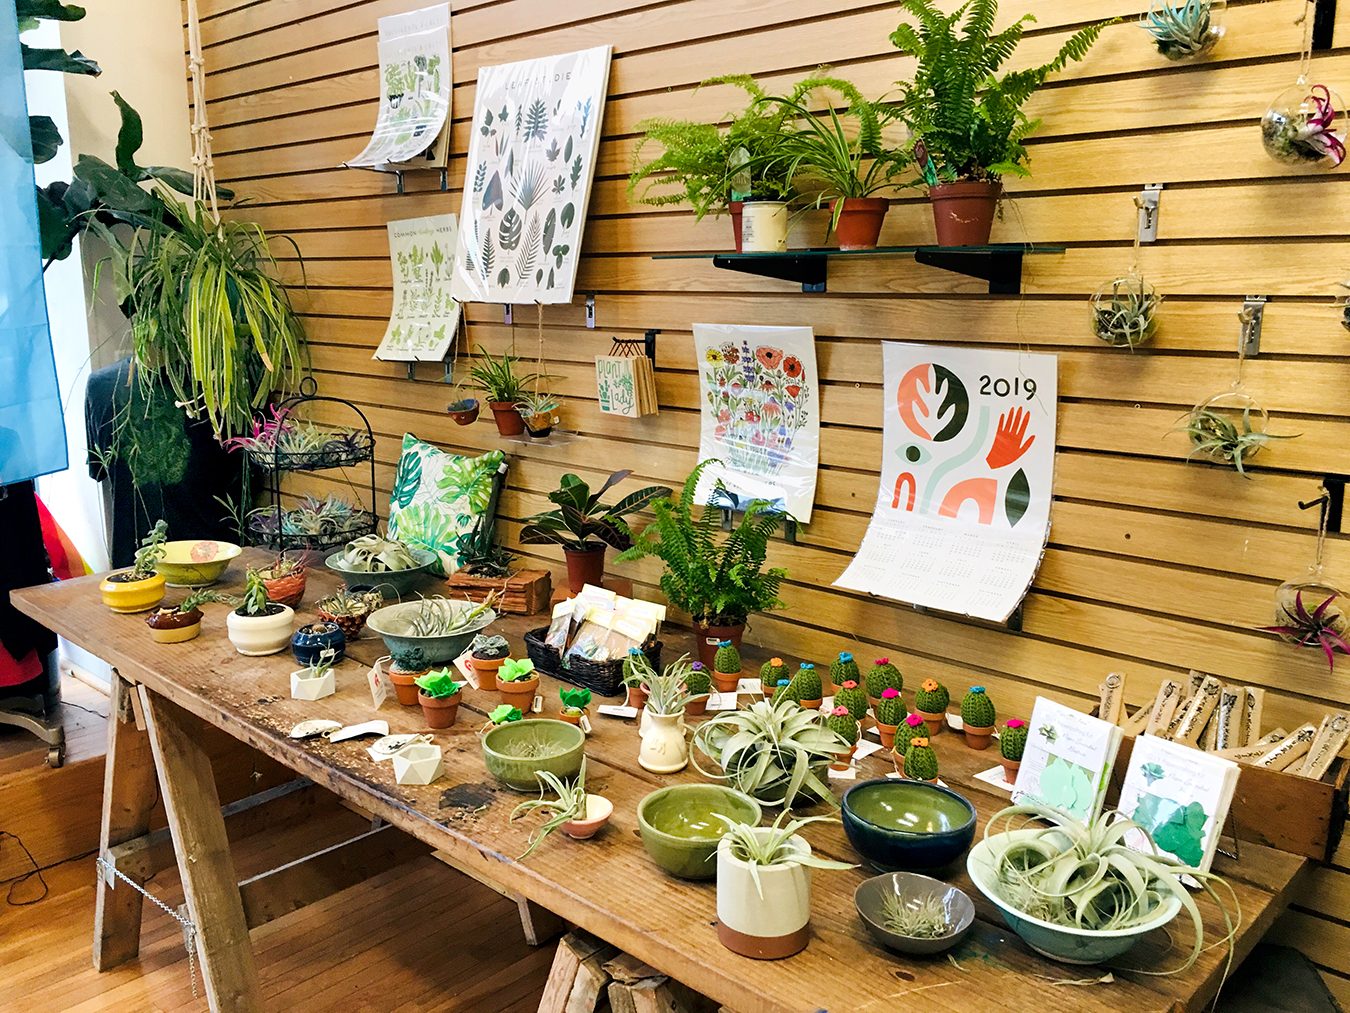 Gather carries a wide variety of unique, handcrafted gifts, including ceramics, illustrations, jewelry, candles, clothing, and more. 